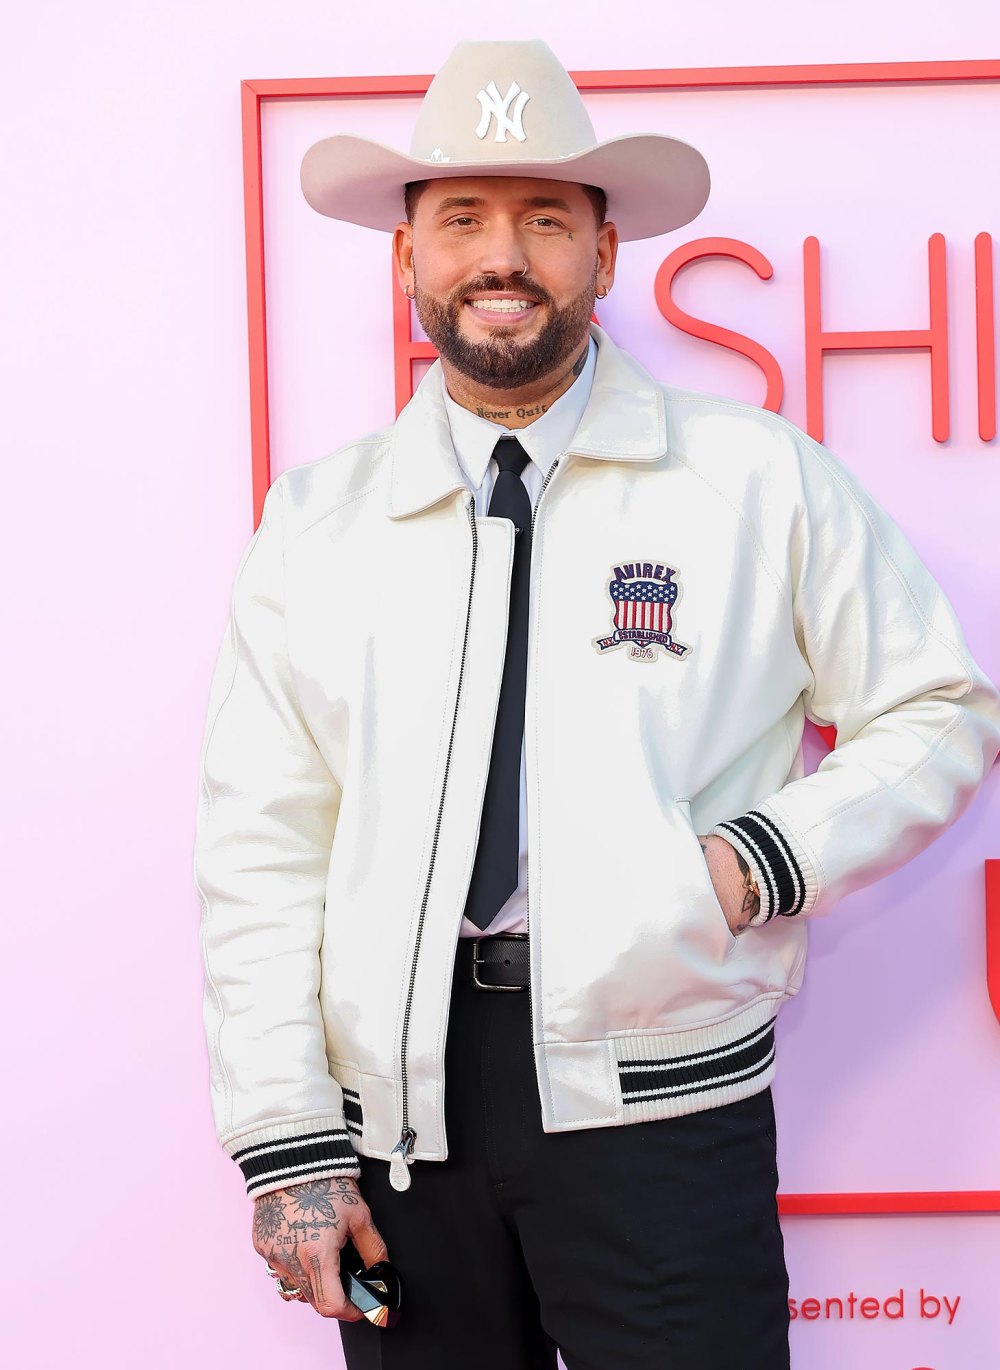 Gashi on ‘Genre-Bending’ Music, Rap-Country Crossovers and Bringing Cowboy Culture to New York